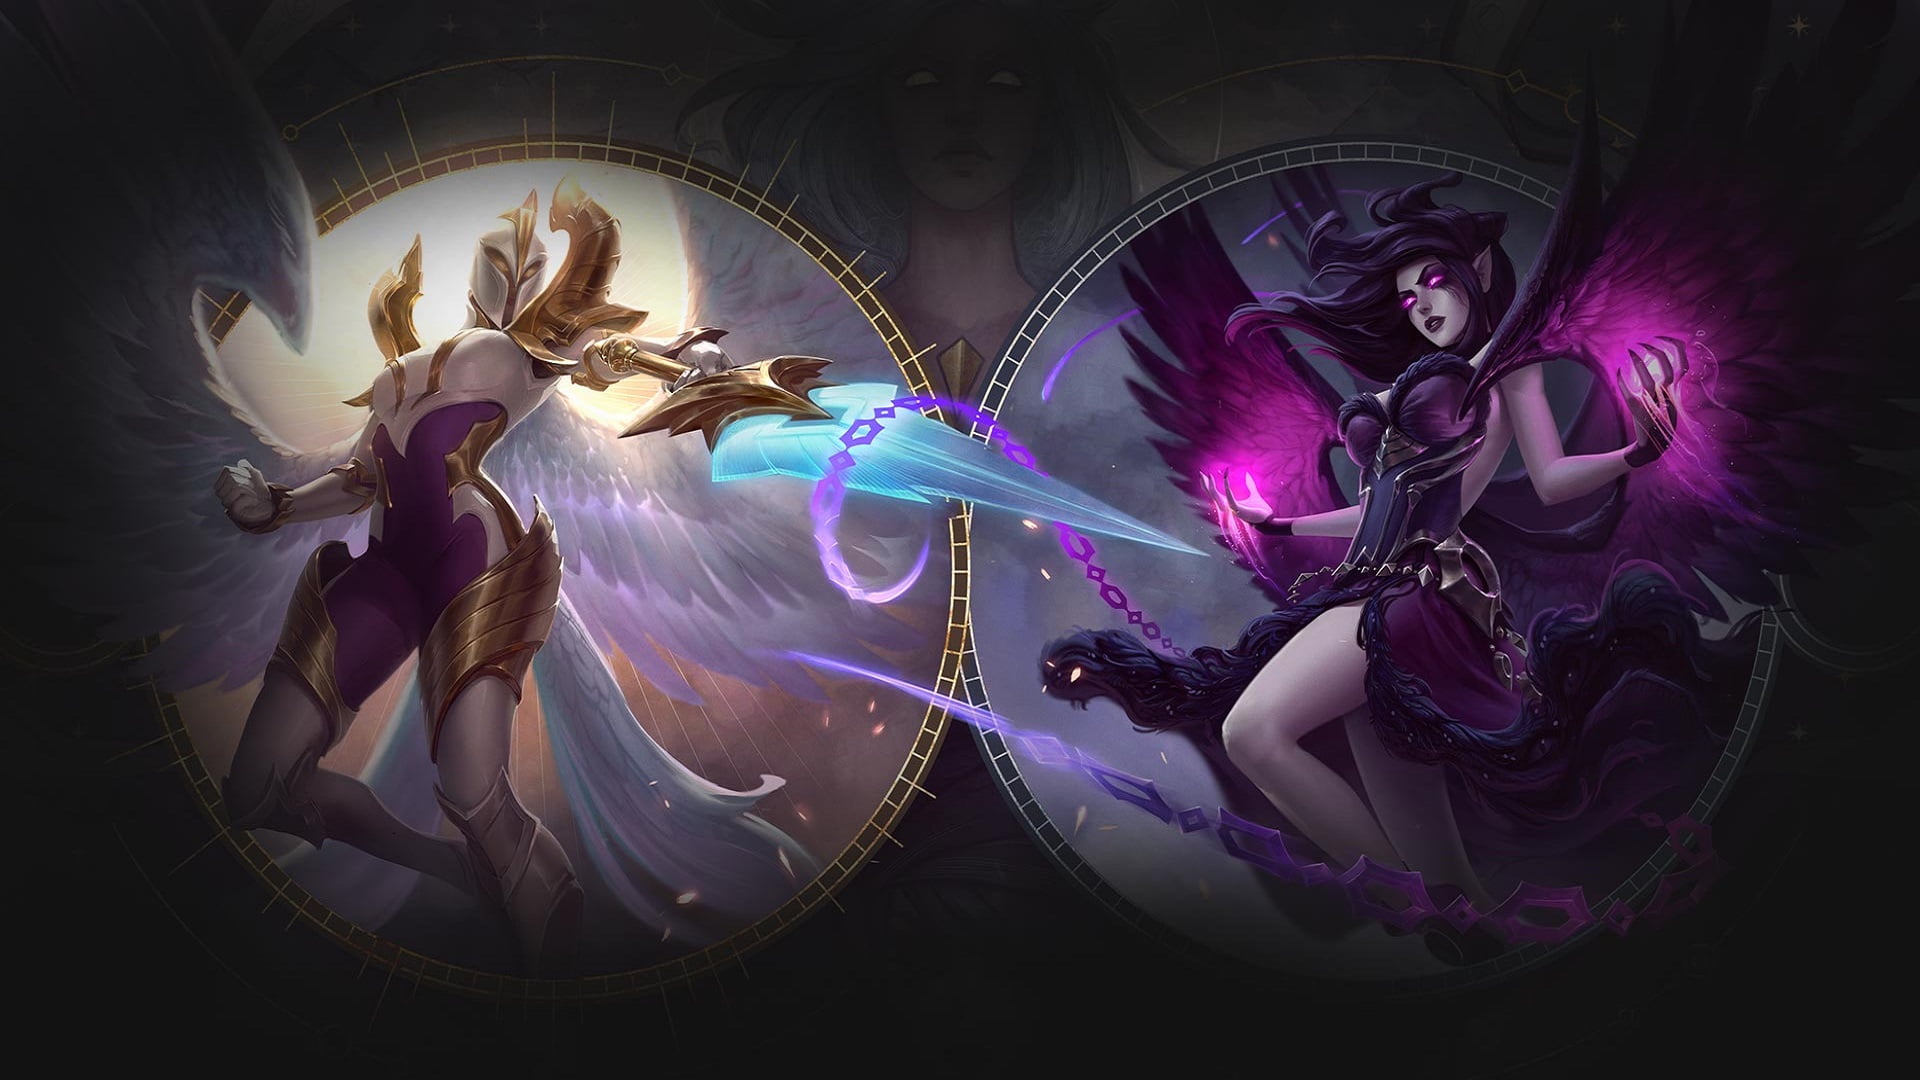 Video Game, League Of Legends, Kayle (League Of Legends), Morgana (League Of Legends)